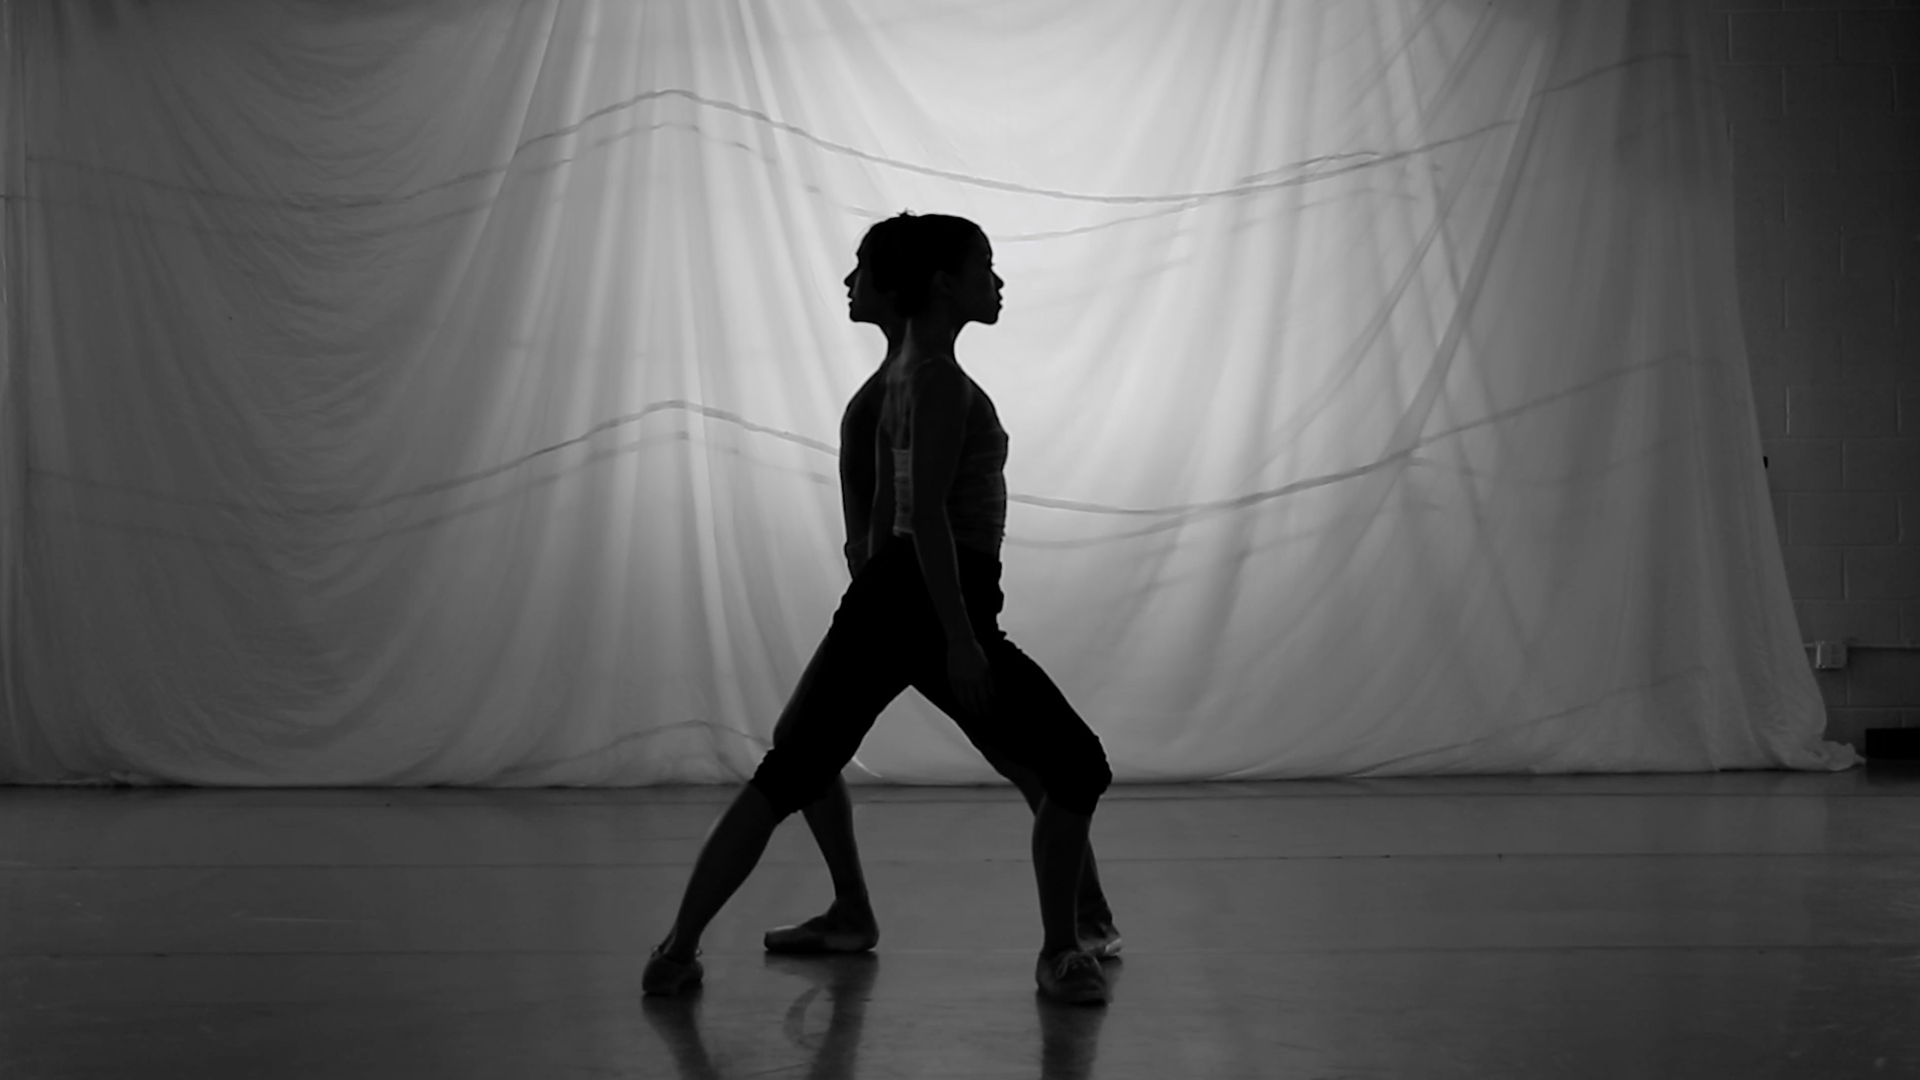 Translation - a film by Felipe Barral in collaboration with Terminus Modern Ballet Theatre